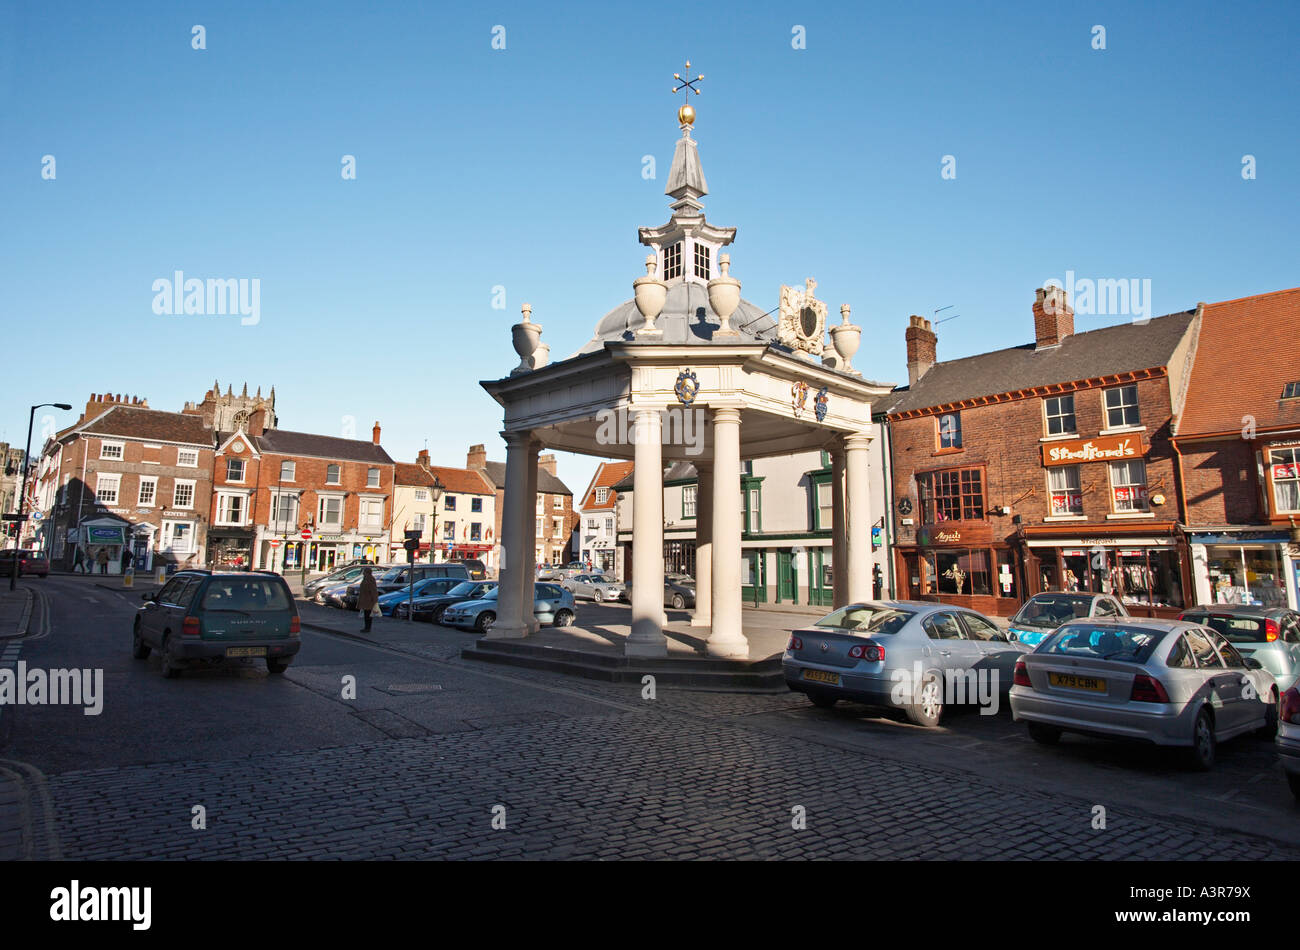 Market Cross in the Market Square Beverley East Yorkshire UK Stock Photo